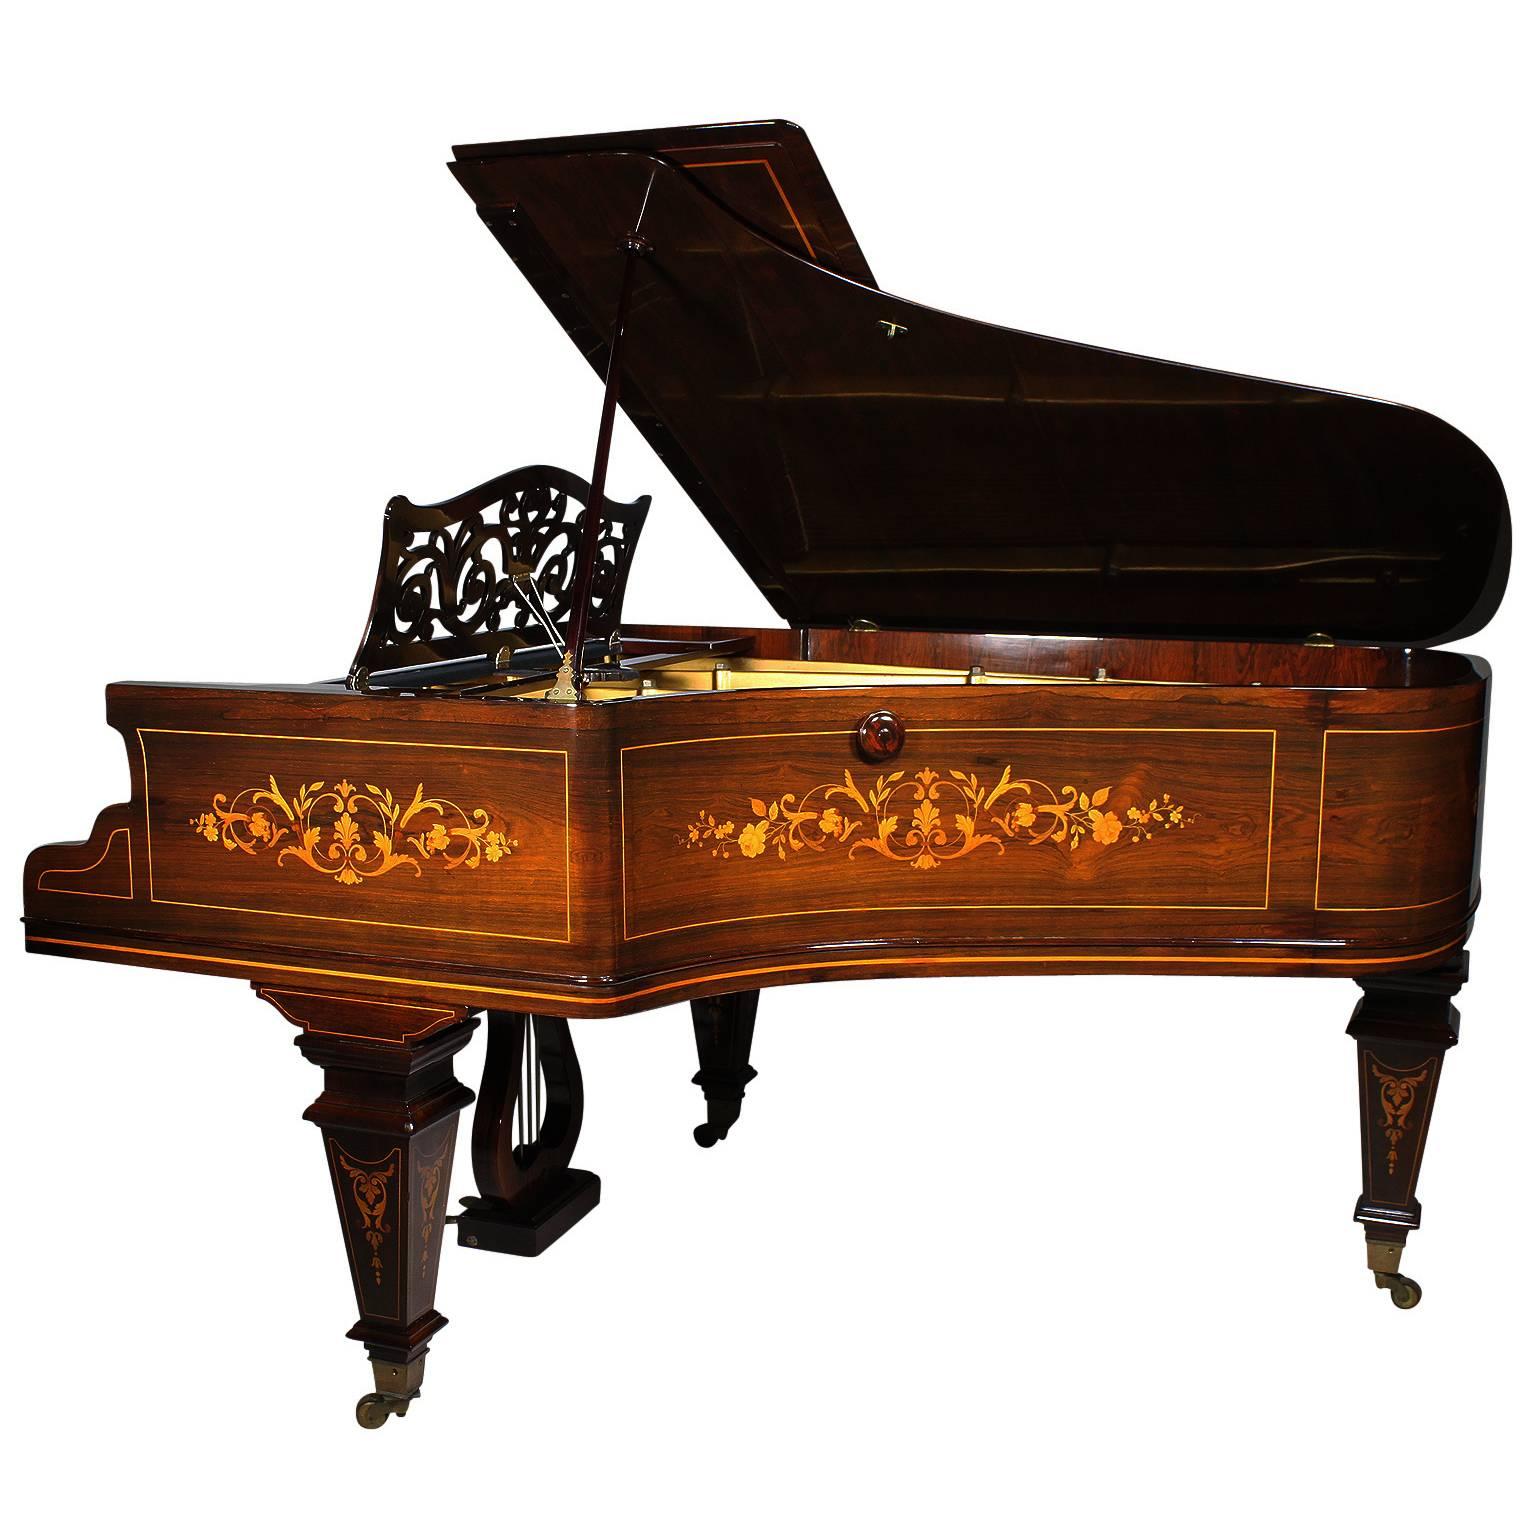 English 19th Century Louis XIV Style Marquetry Baby Grand Piano by Collard & Collard For Sale